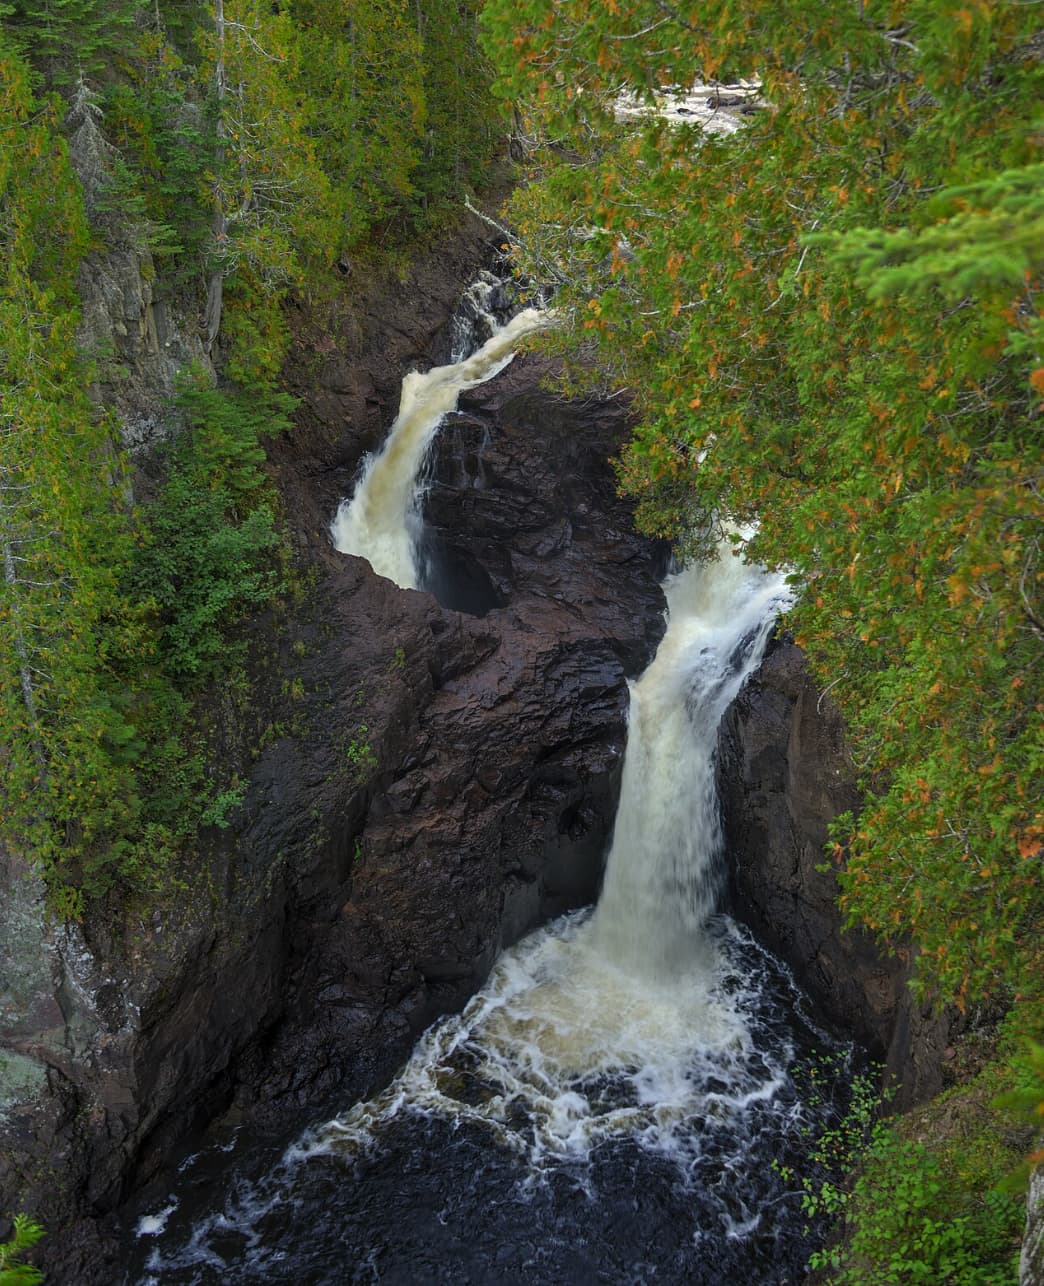 “There's a waterfall in Minnesota that falls into a large hole made of rock; scientists have tried ping pong b—s and dye and still don't know where the water goes.”